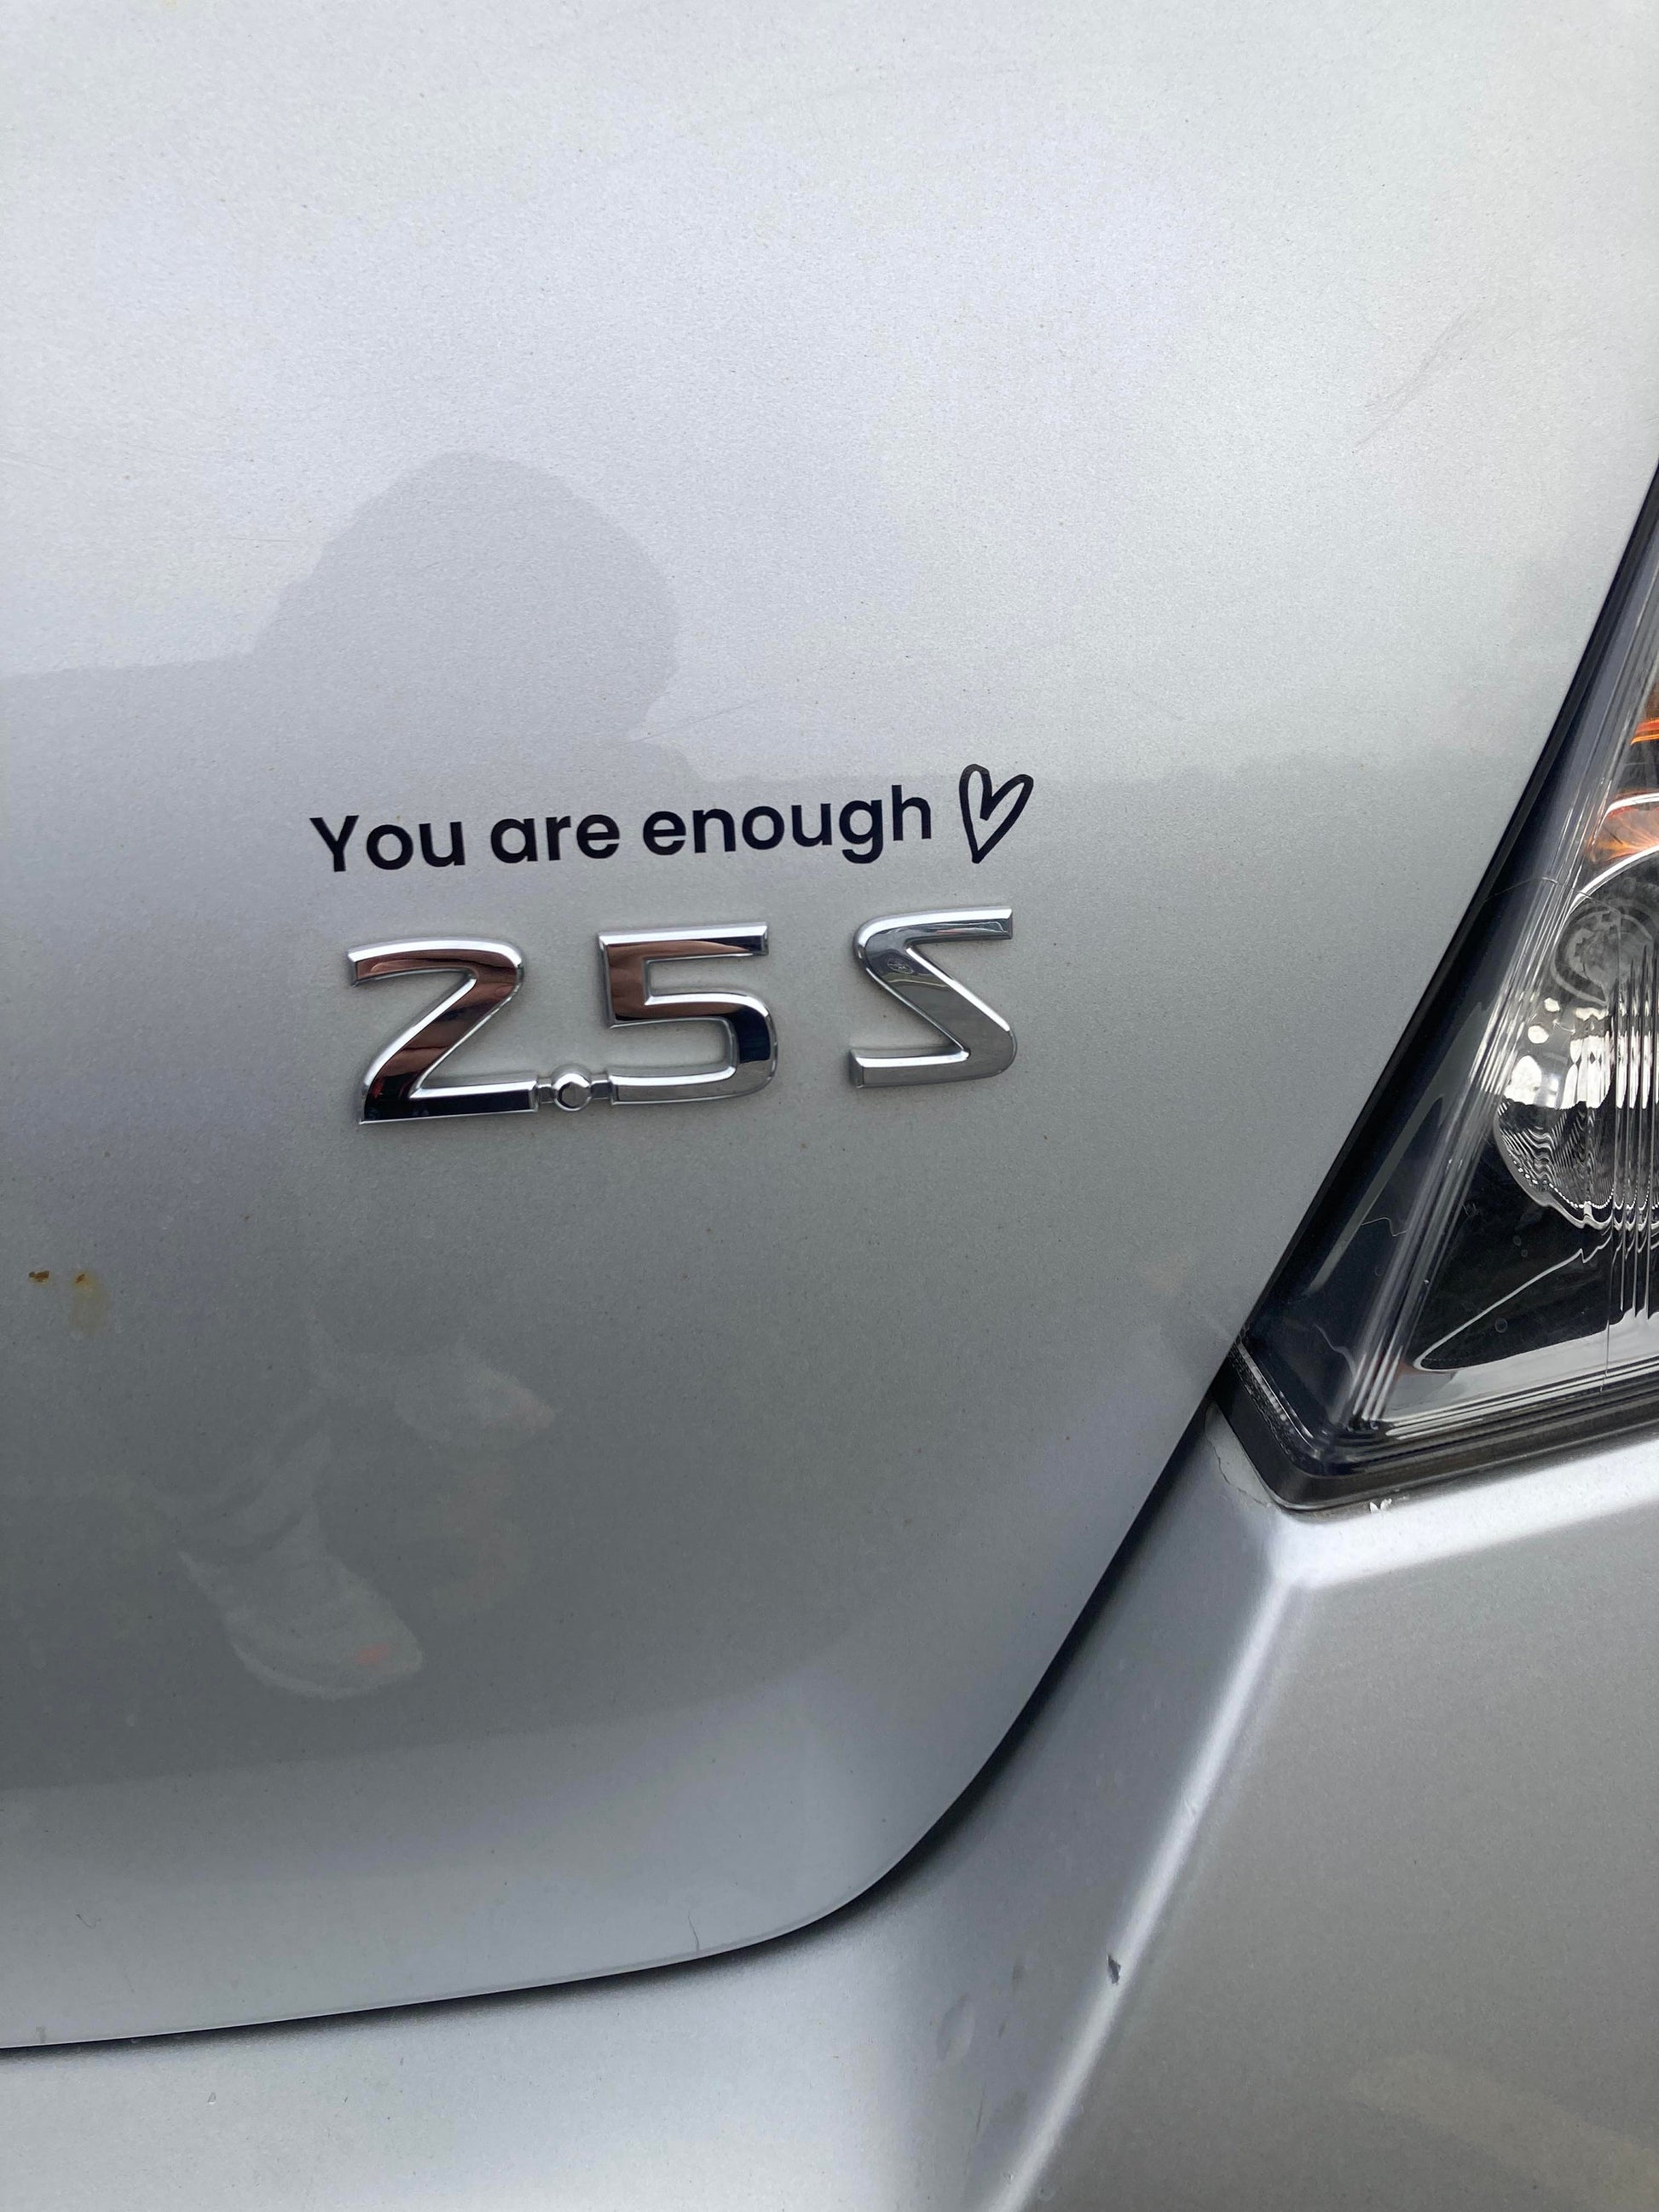 You Are Enough | Positive Affirmation | Car Decal | Mirror Decal | Car Accessories | Stocking Stuffer